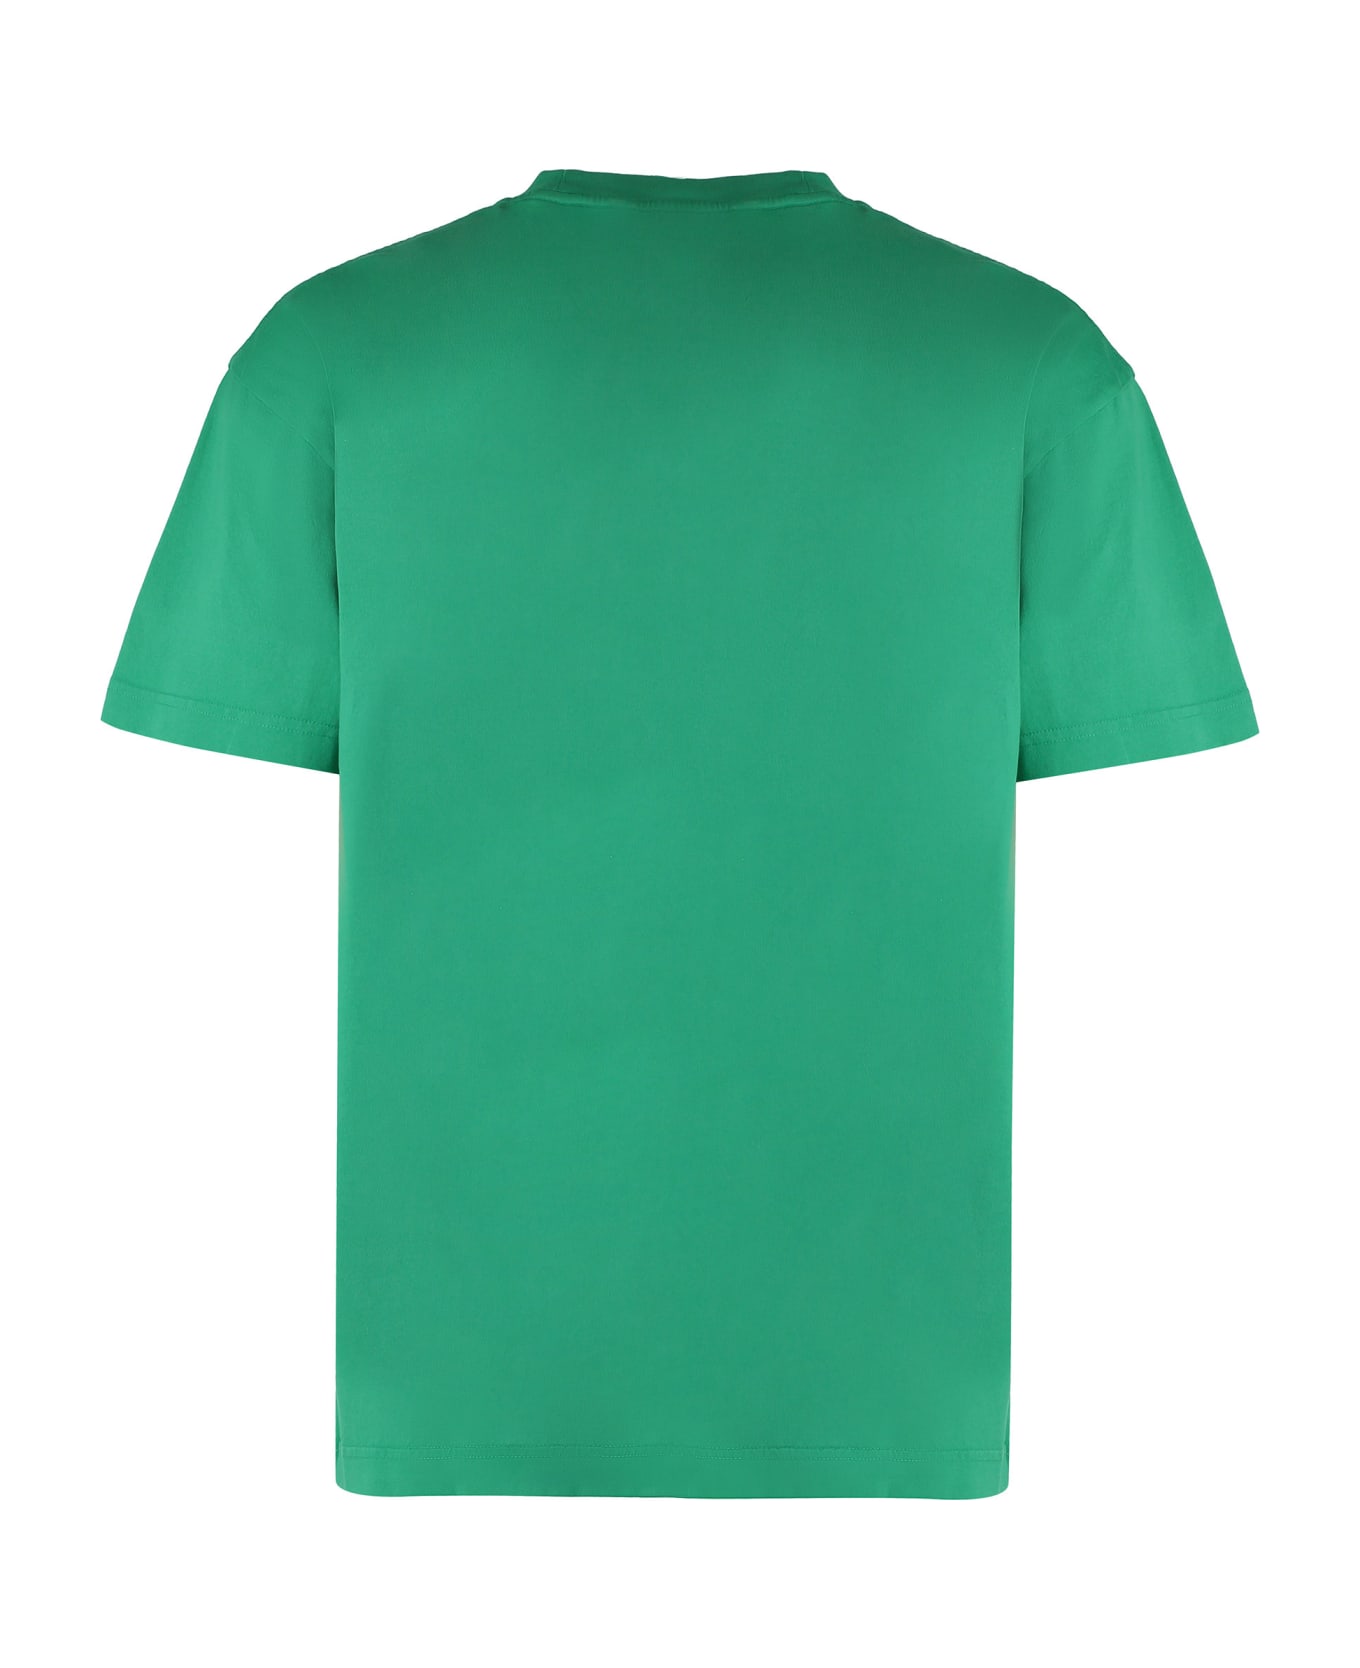 Palm Angels The Palm T-shirt - green